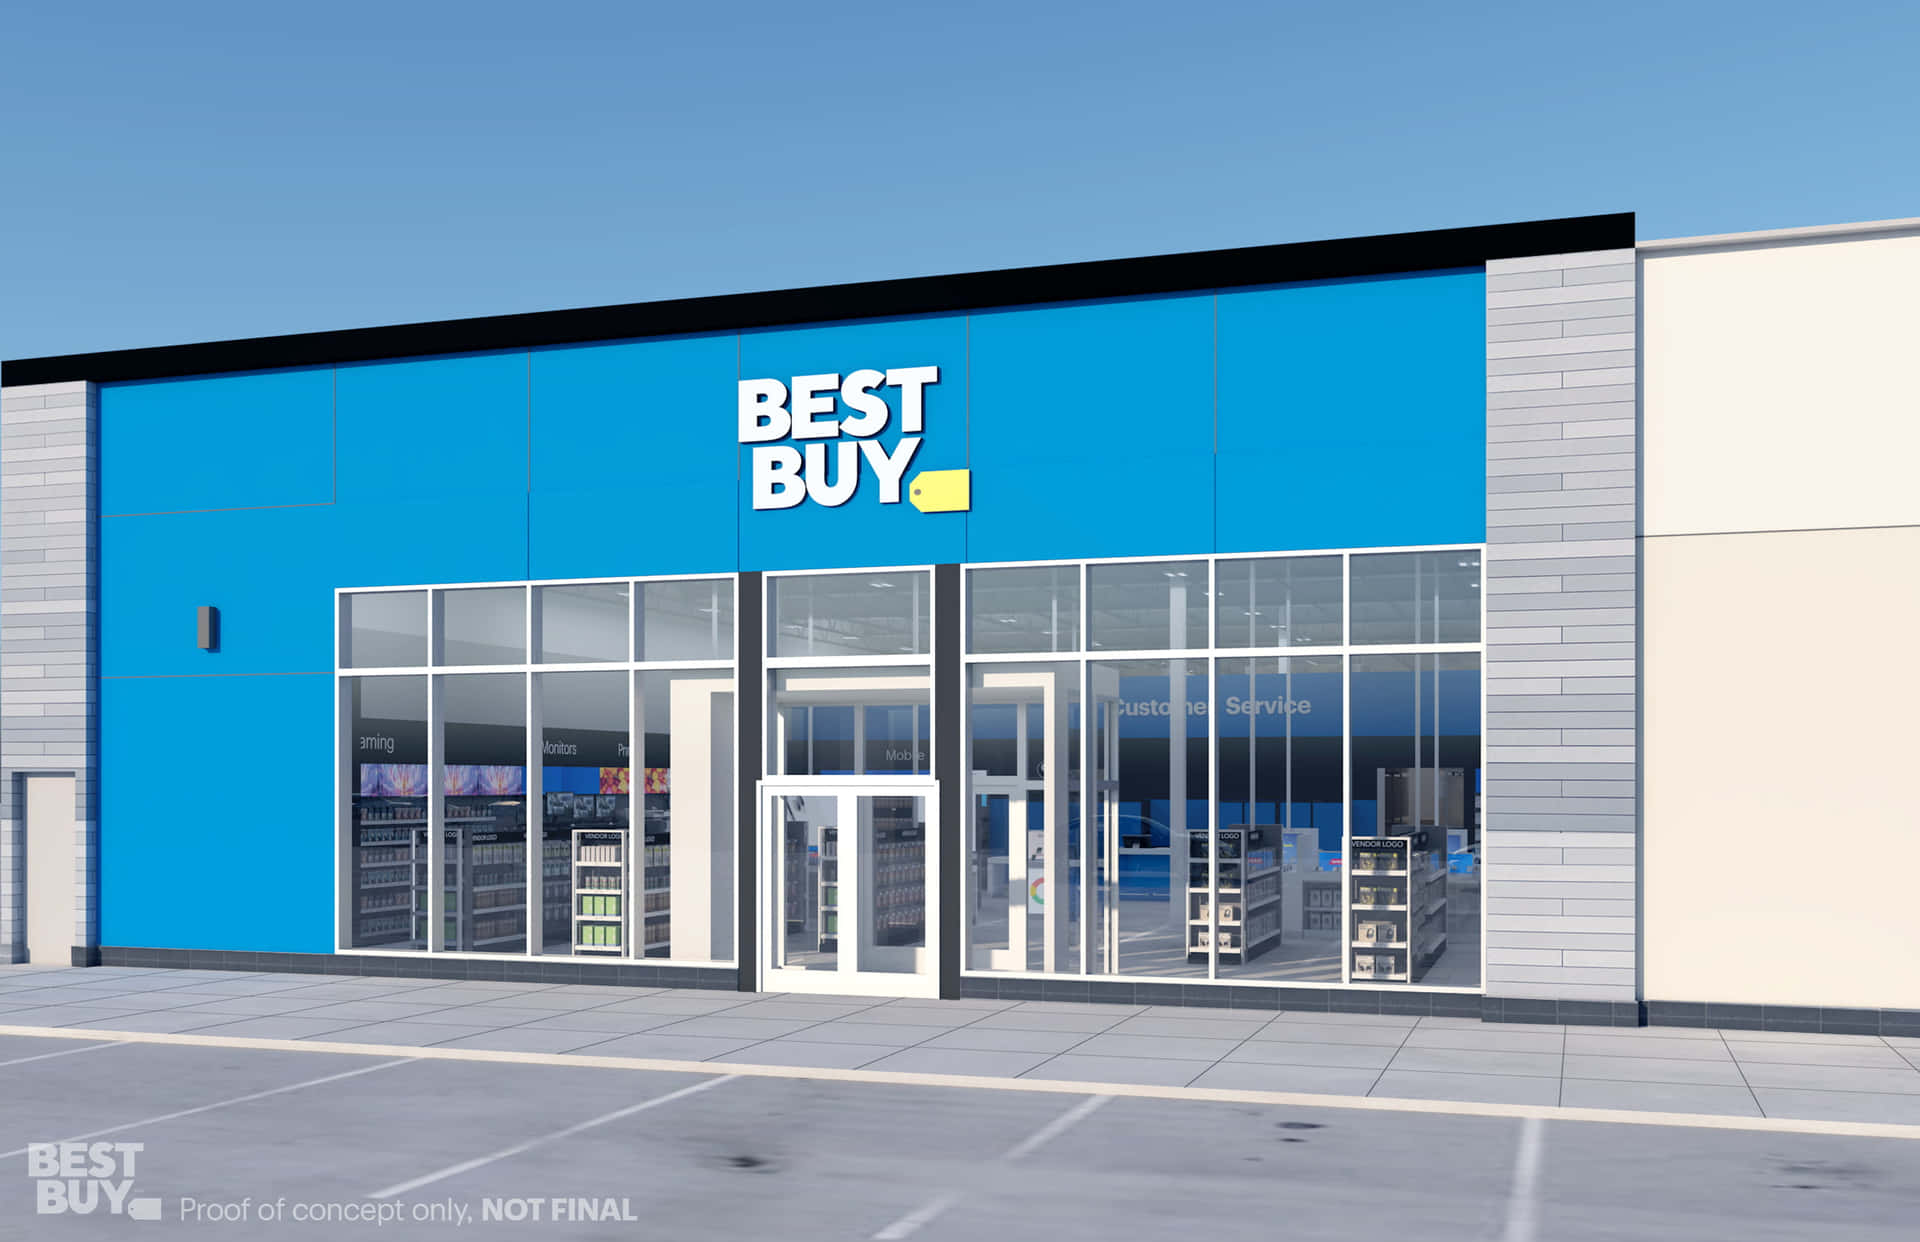 Find your perfect tech solution at Best Buy